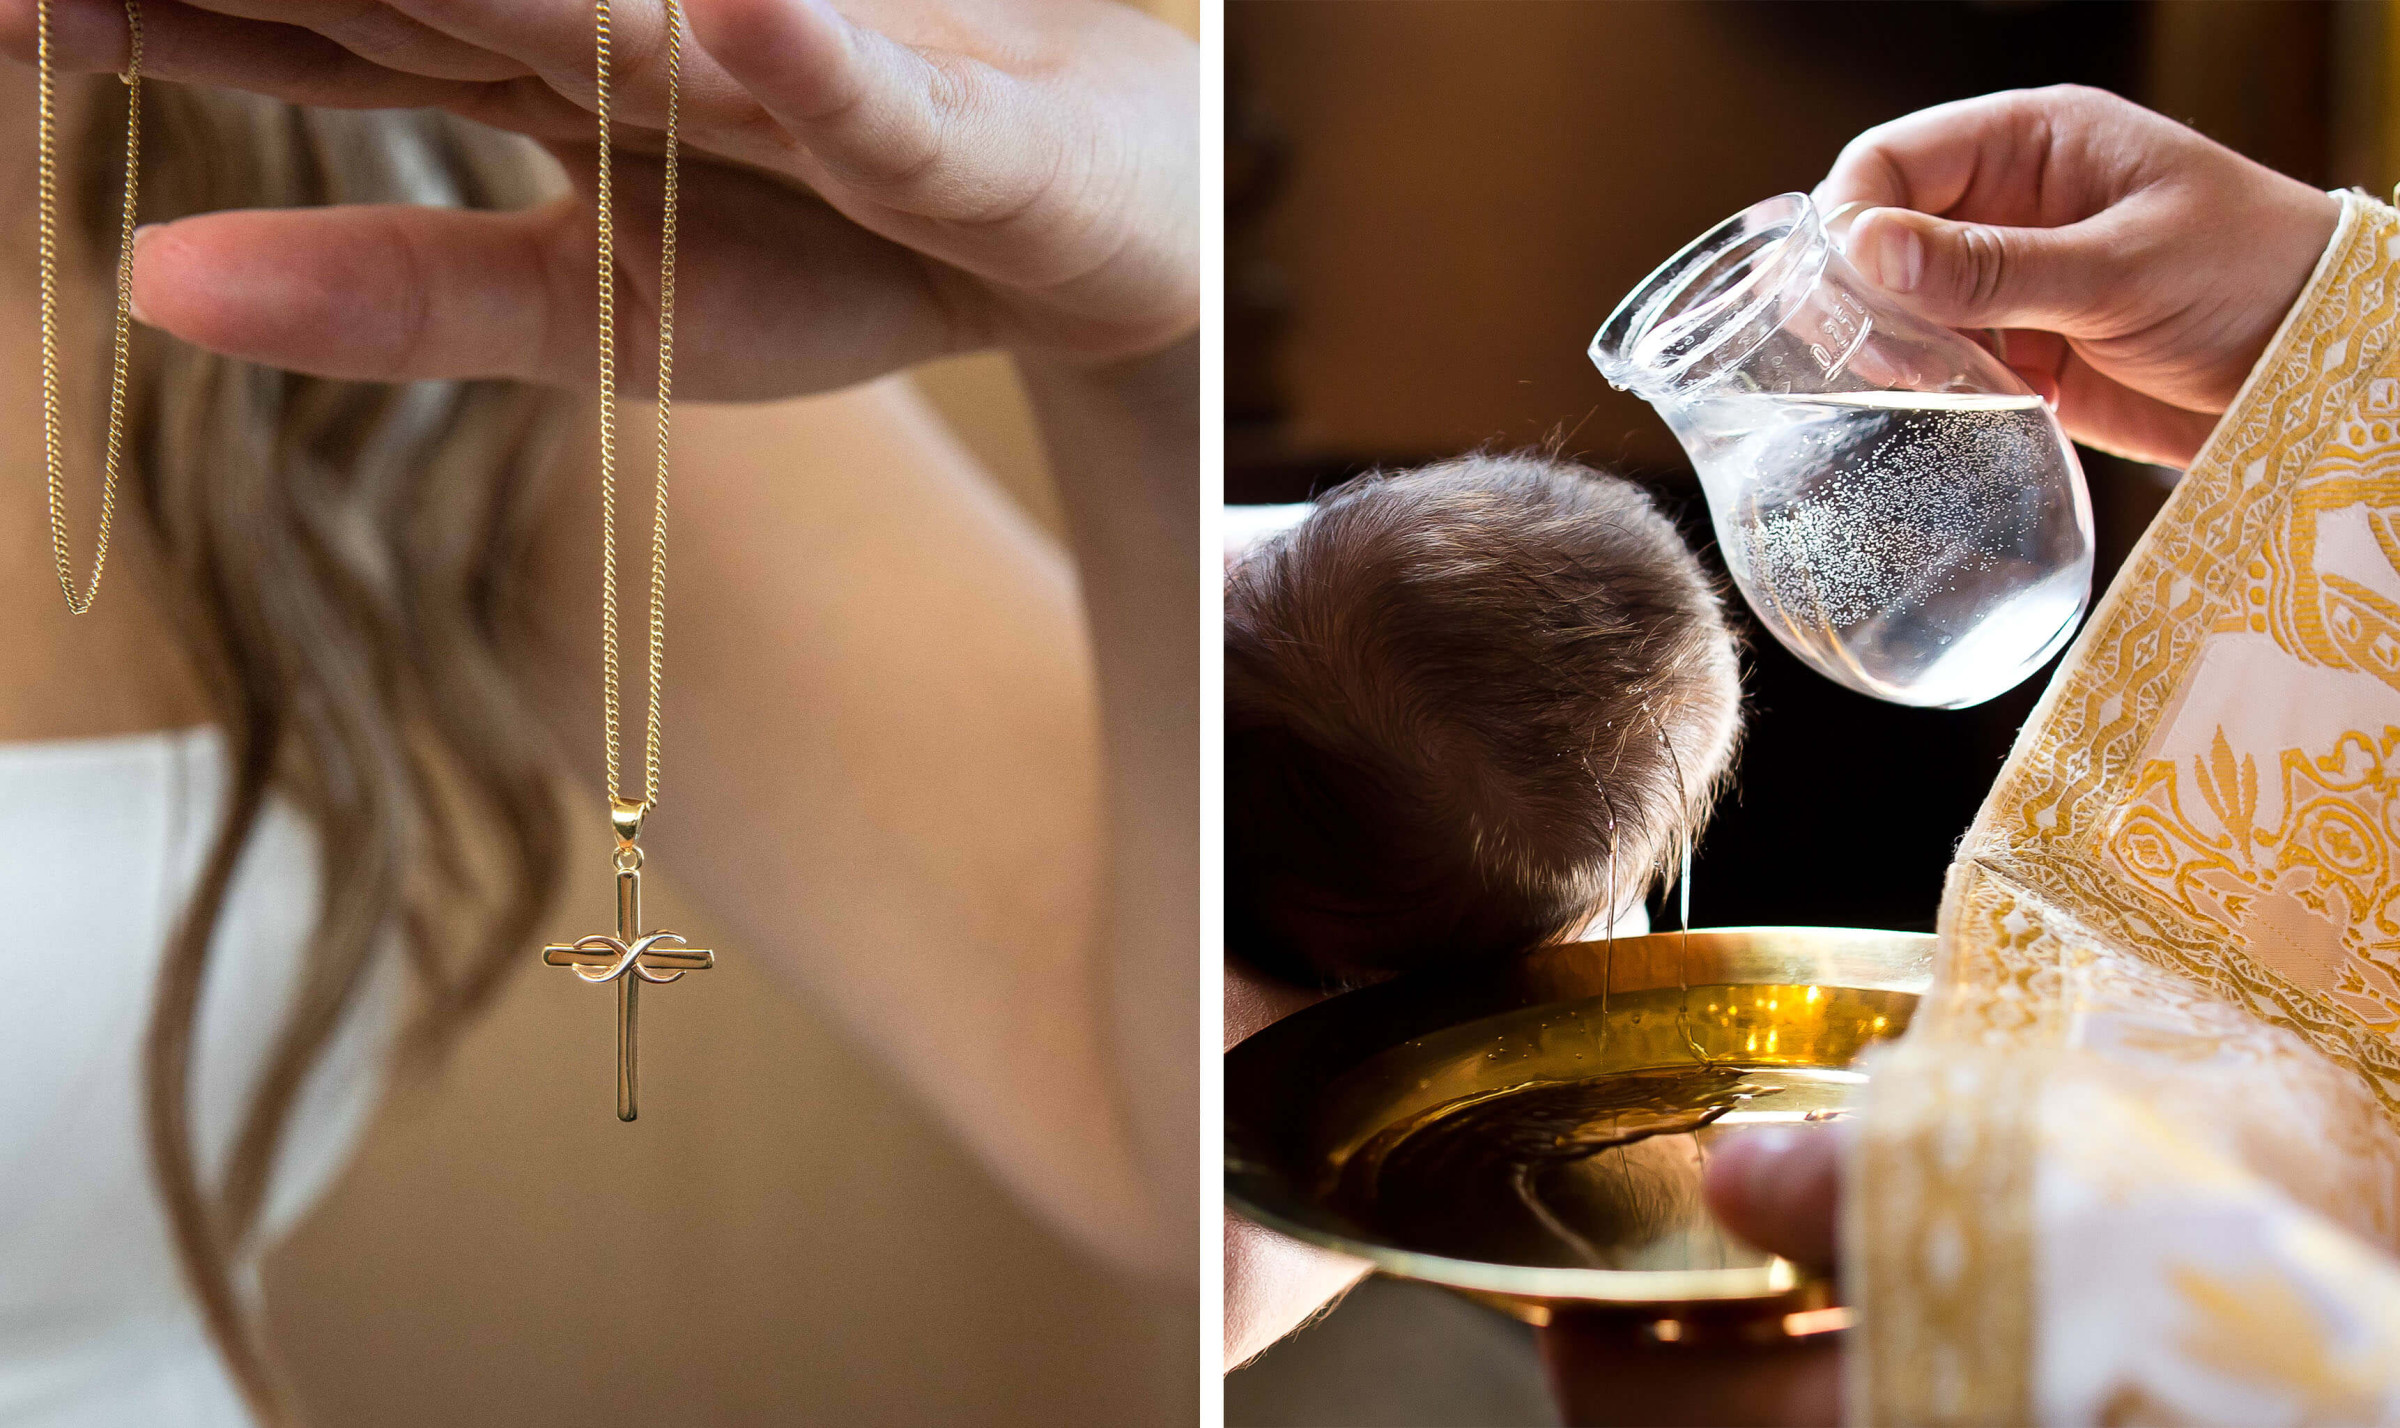 christening gift ideas: a necklace and priest pouring water over a child